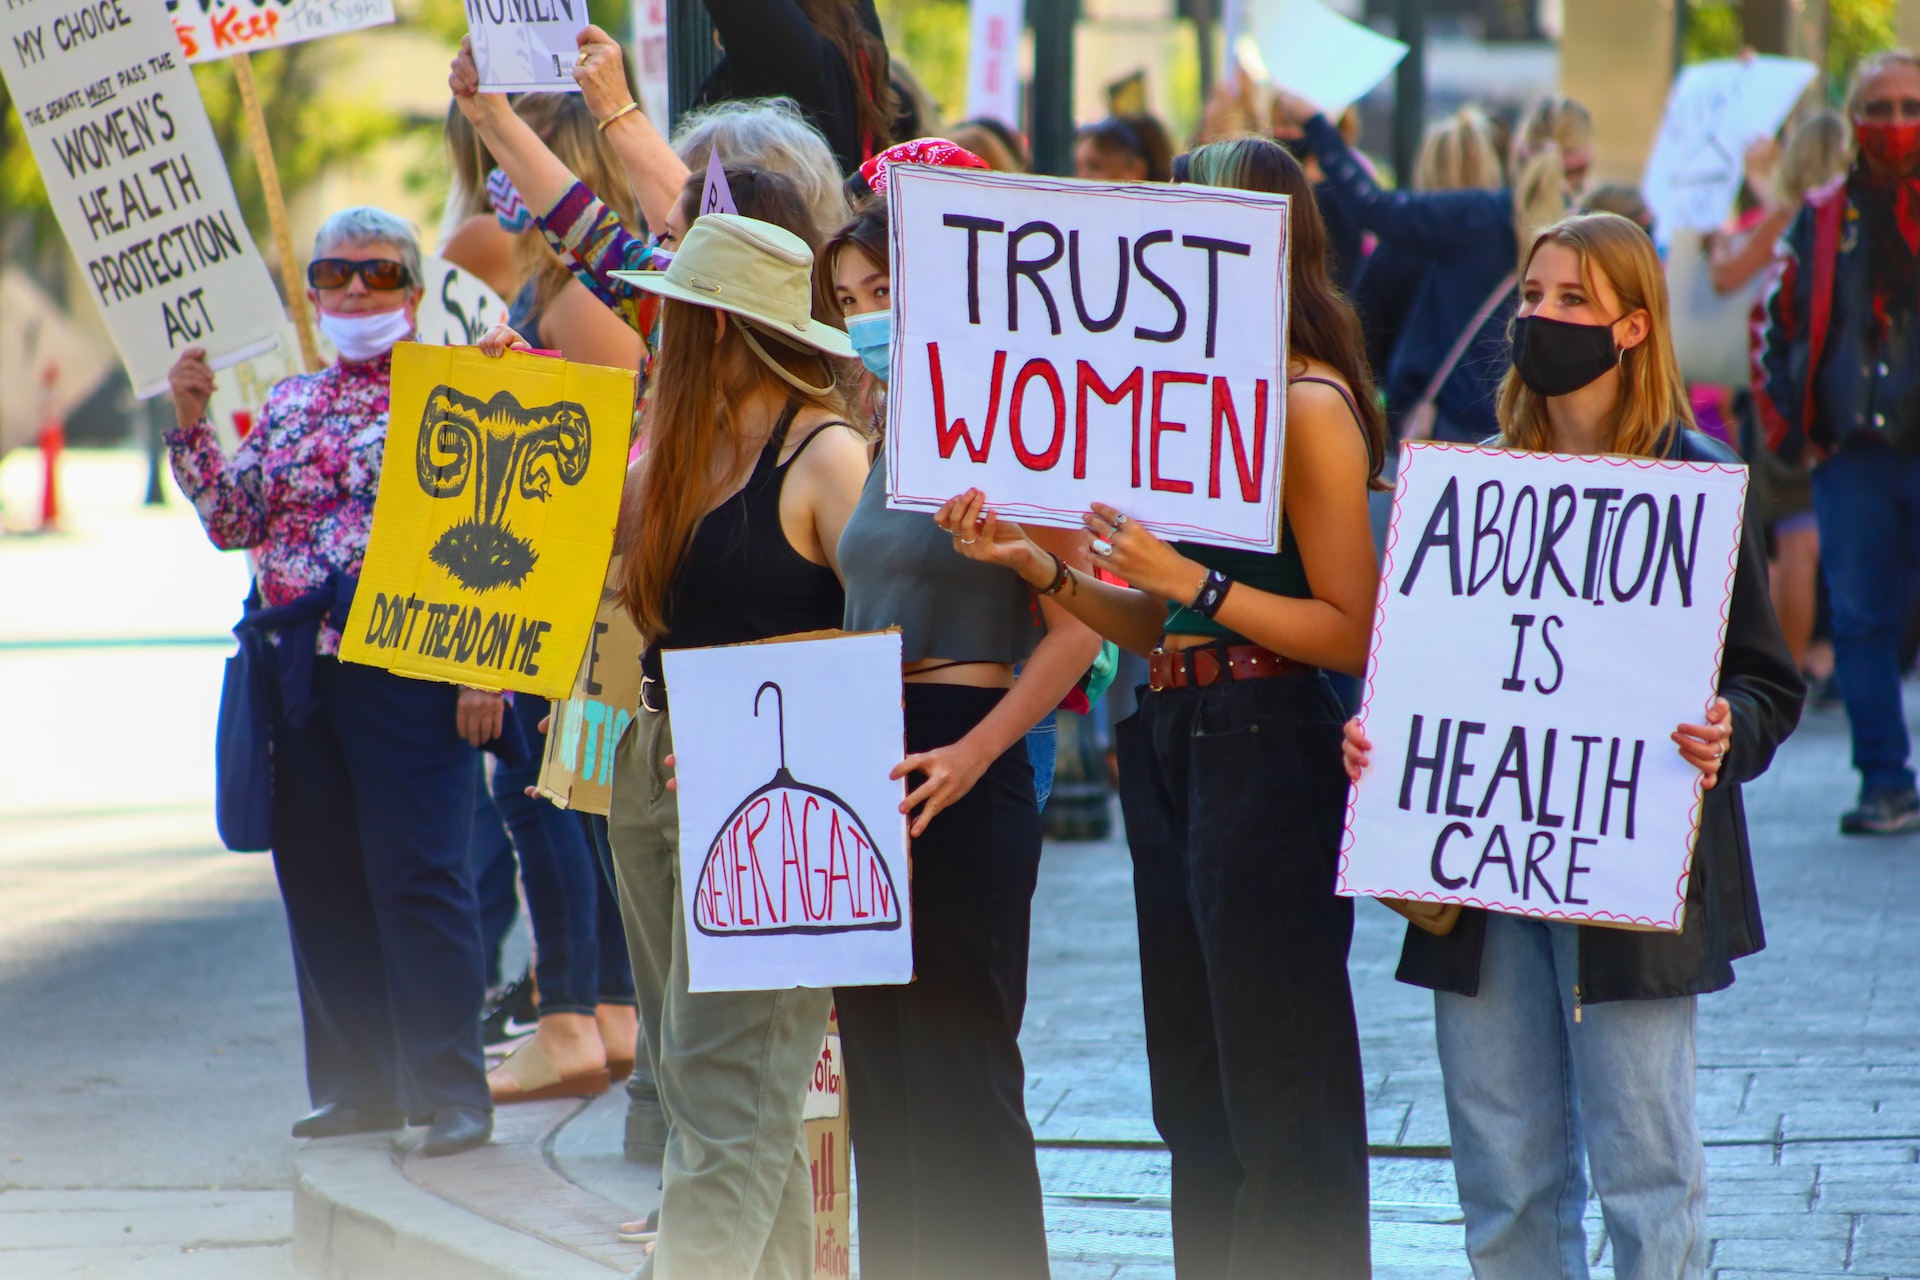 Female members of abortion abortion-rights movements protest on the streets with their placards